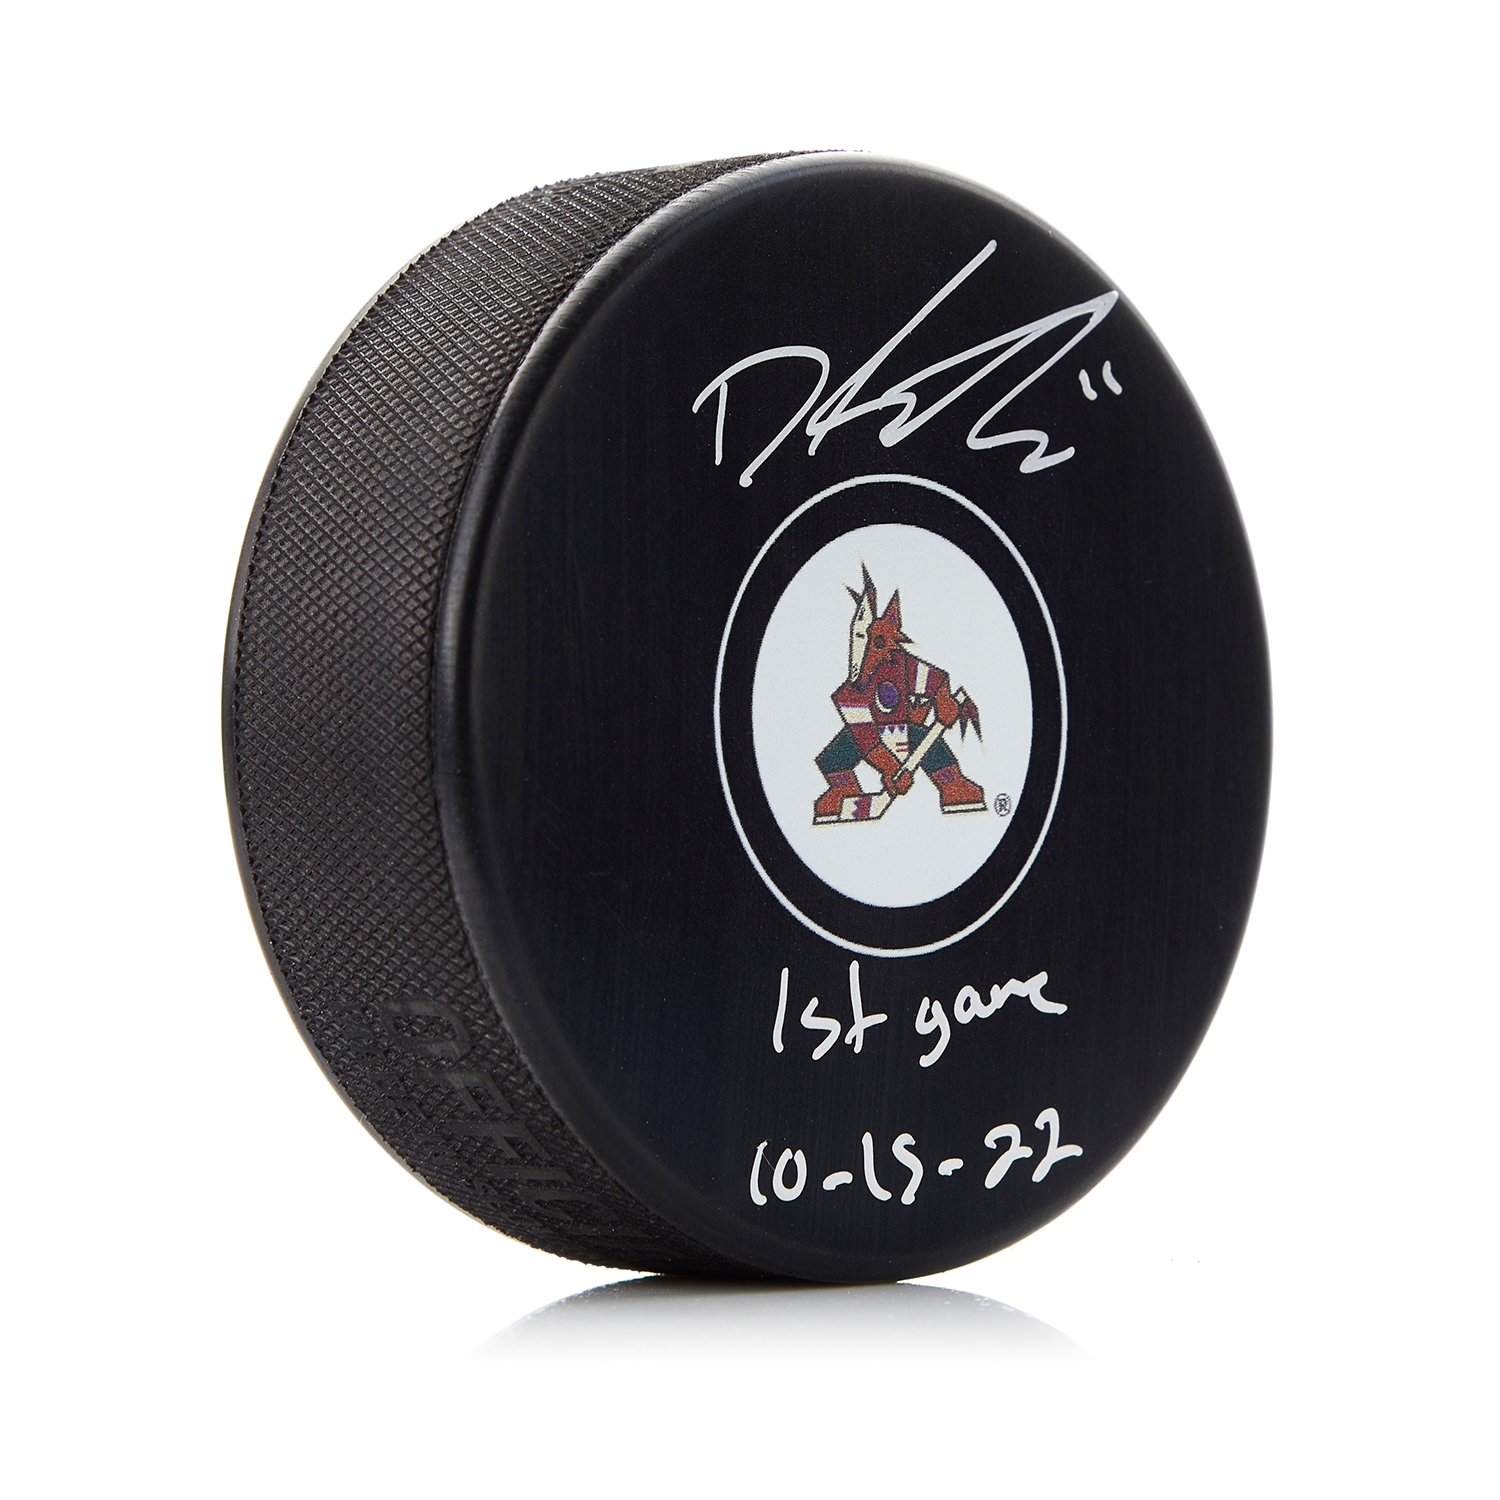 Dylan Guenther Signed & Dated Arizona Coyotes 1st Game Puck